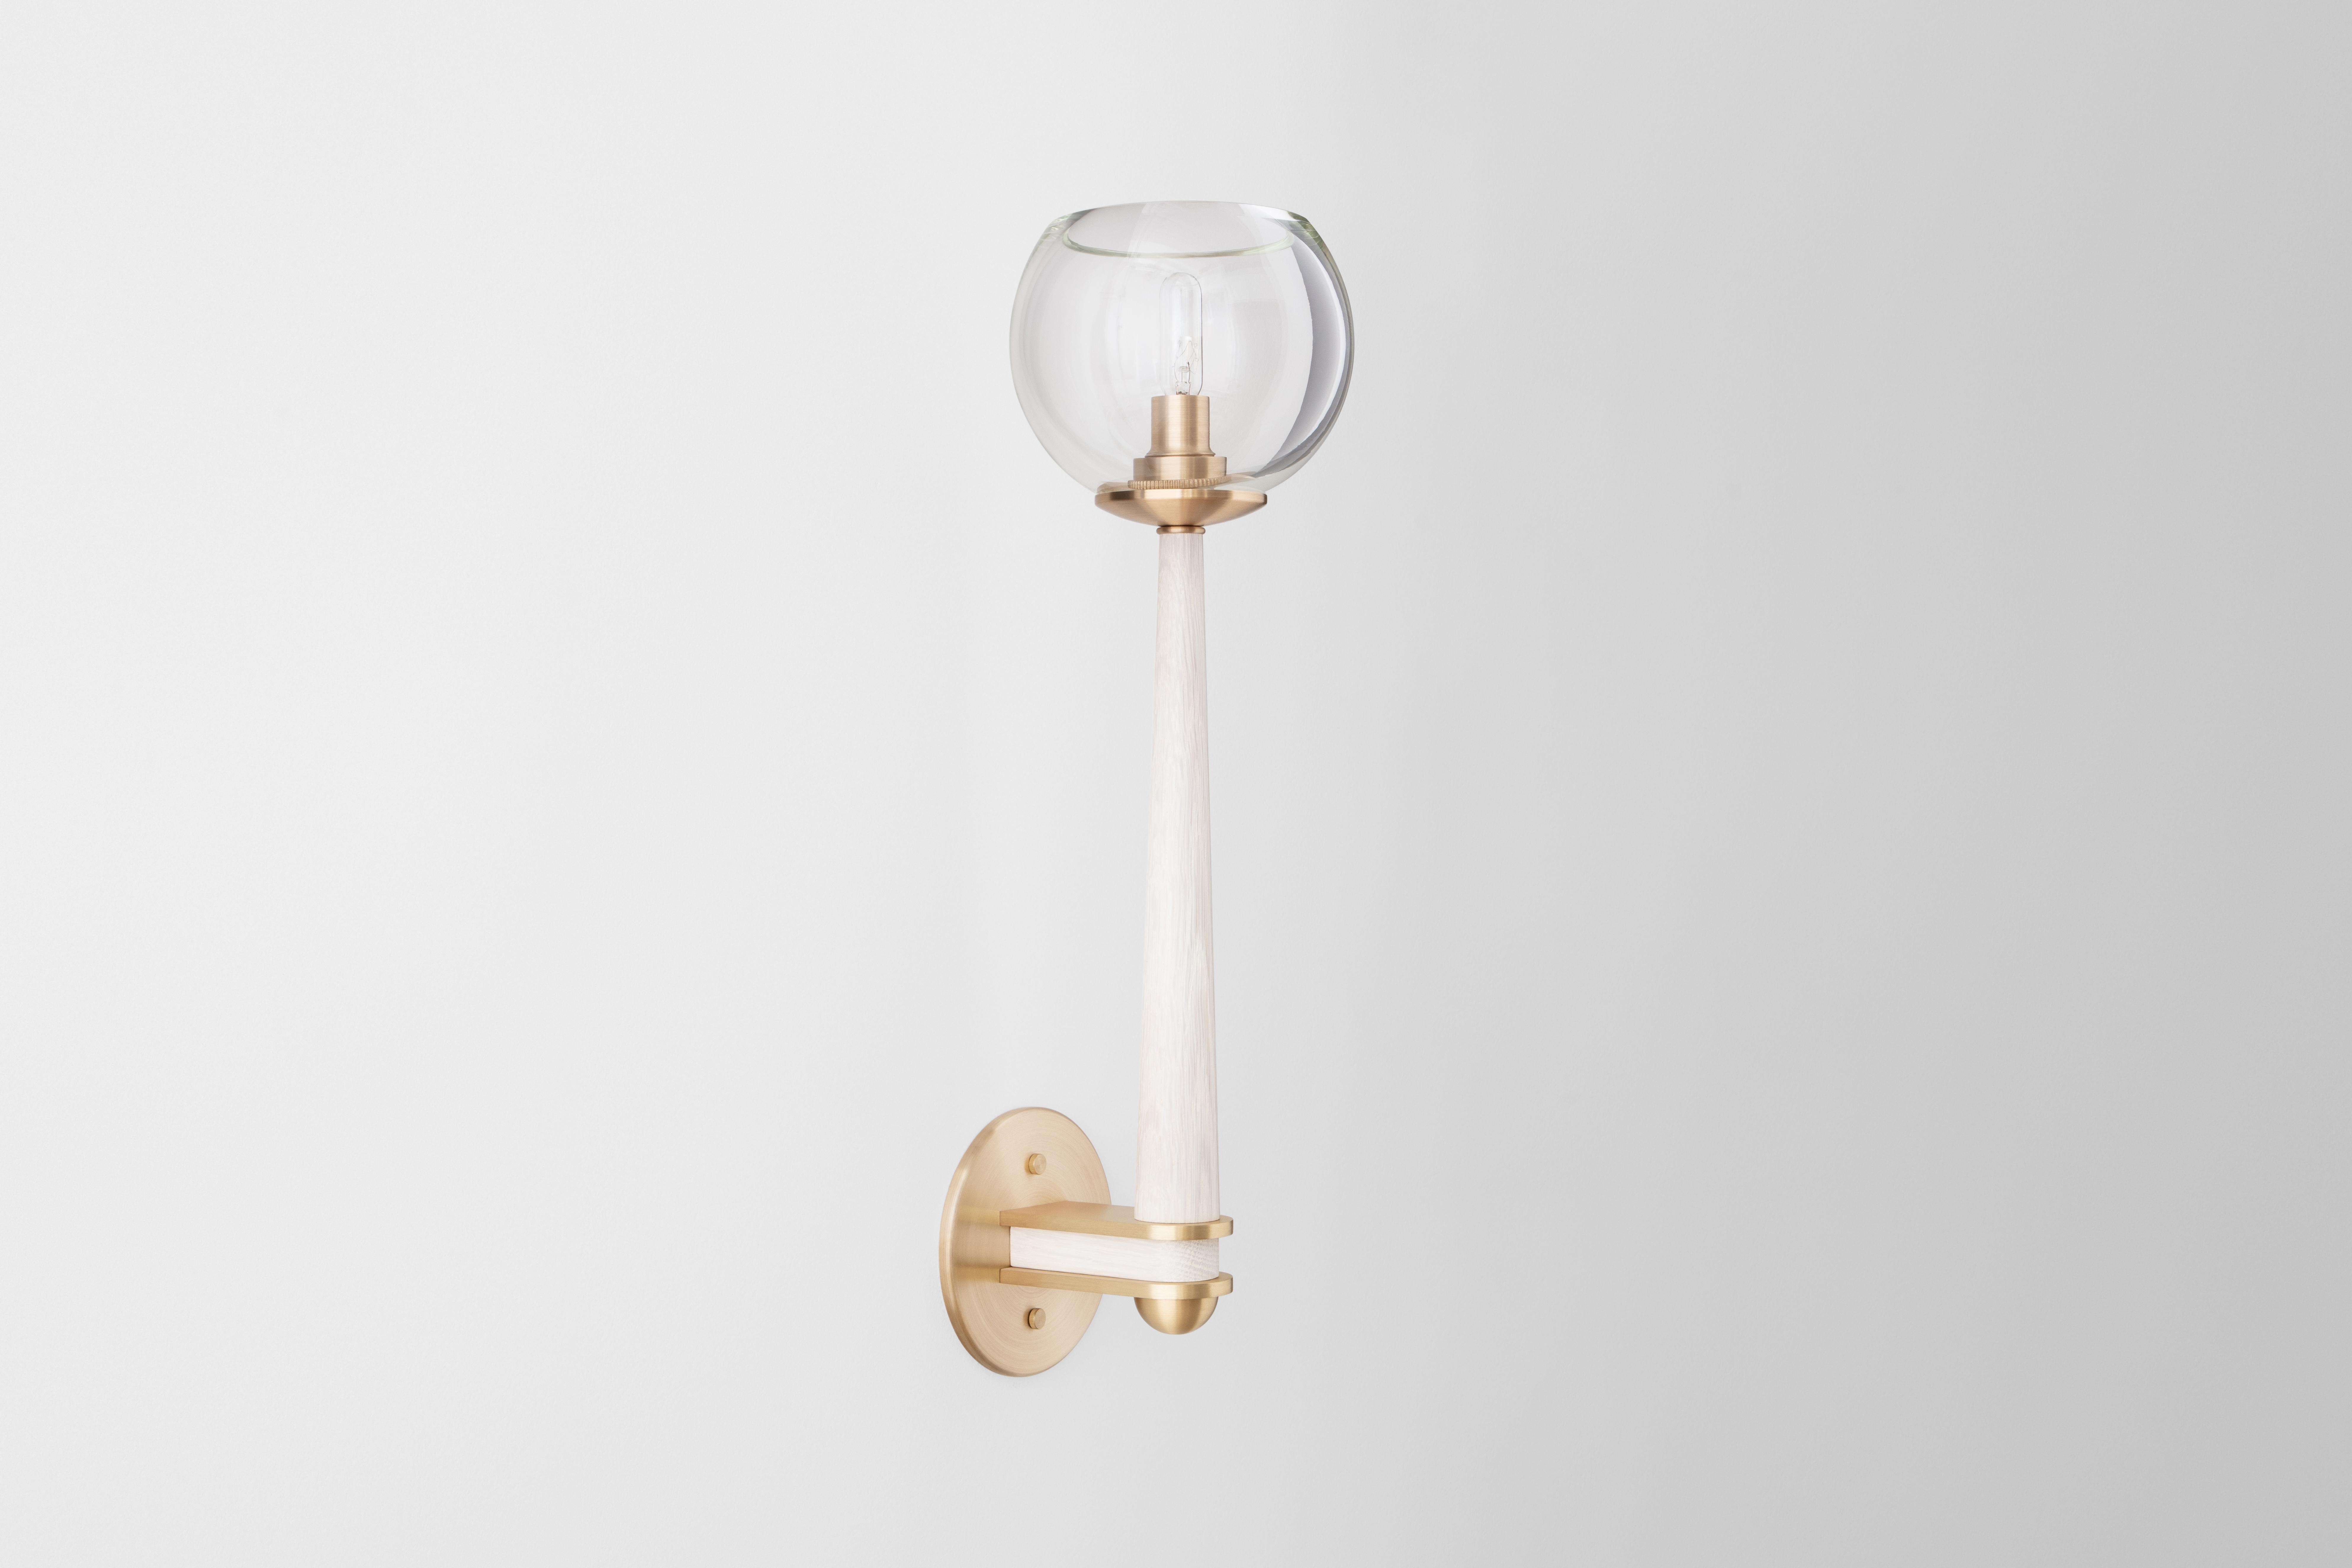 The Giotto sconce unifies three luxe materials. A hand blown globe rests upon a tapered wooden body. Precisely machined brass elements add ornament and strength. Wood, glass and brass finishes can be customized to coordinate with many architectural